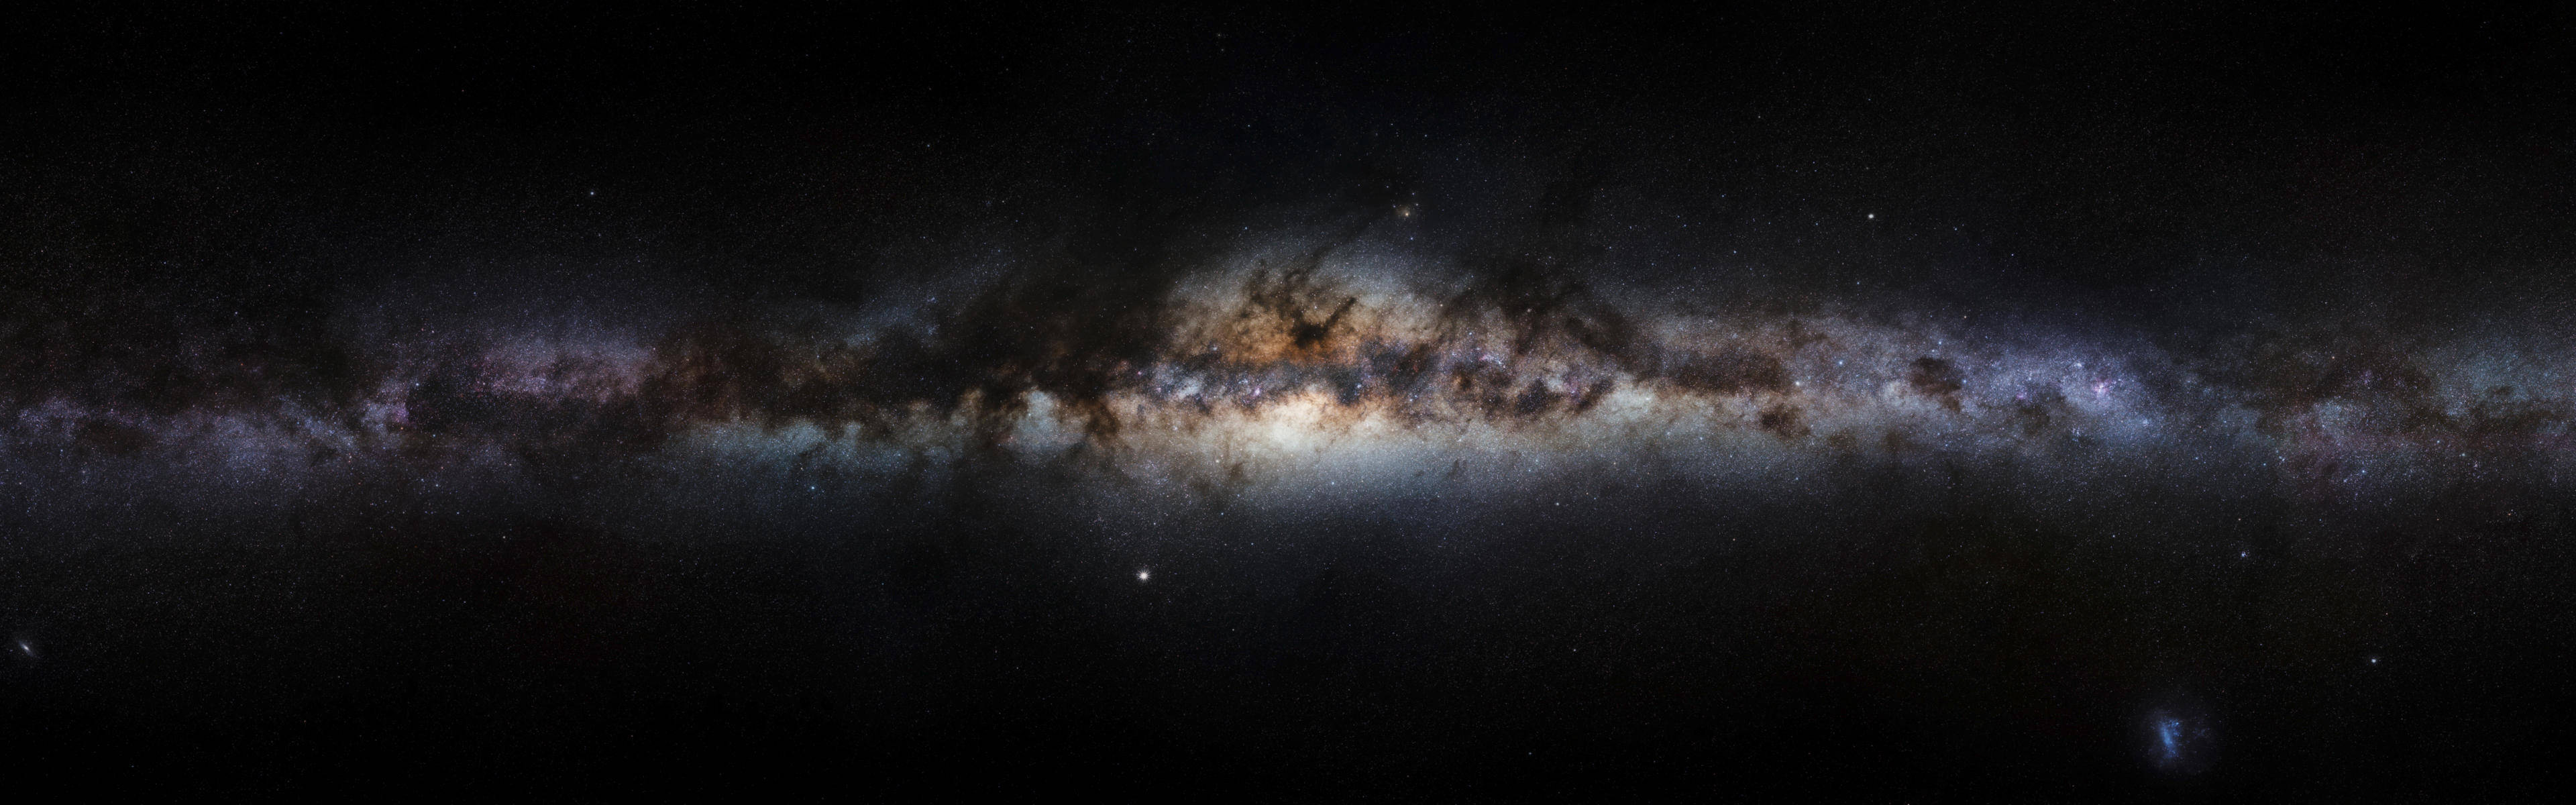 High Resolution Dual Monitor Milky Way Background